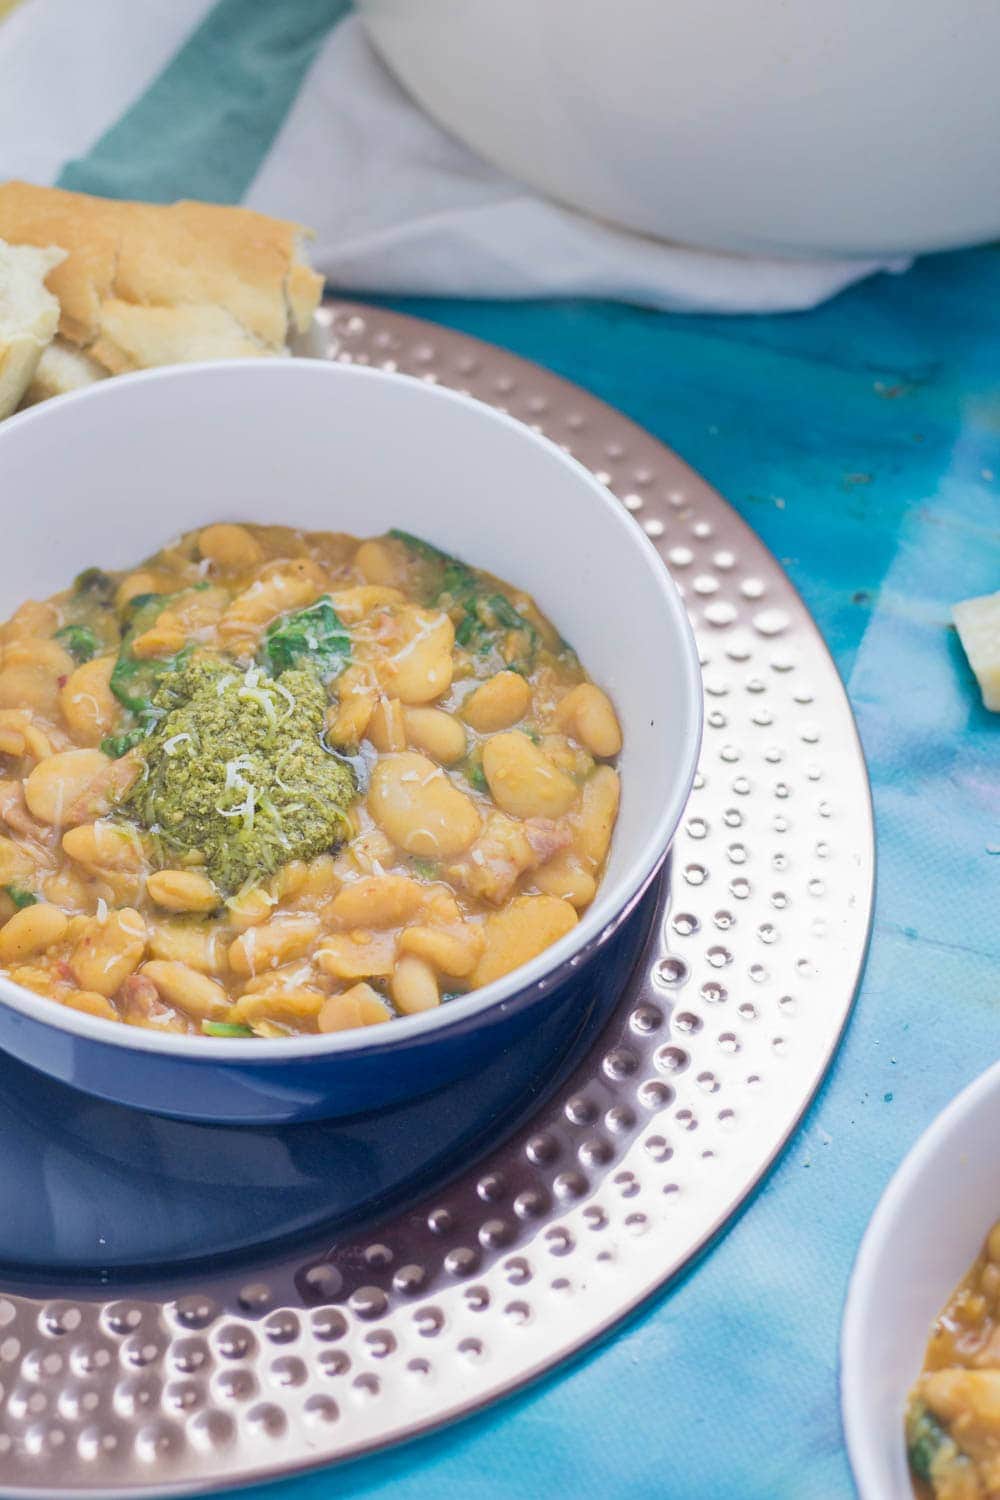 Beans are cooked with bacon, garlic & chicken stock to make this tasty white bean stew. Topped with a homemade pesto for a comforting winter dinner. 